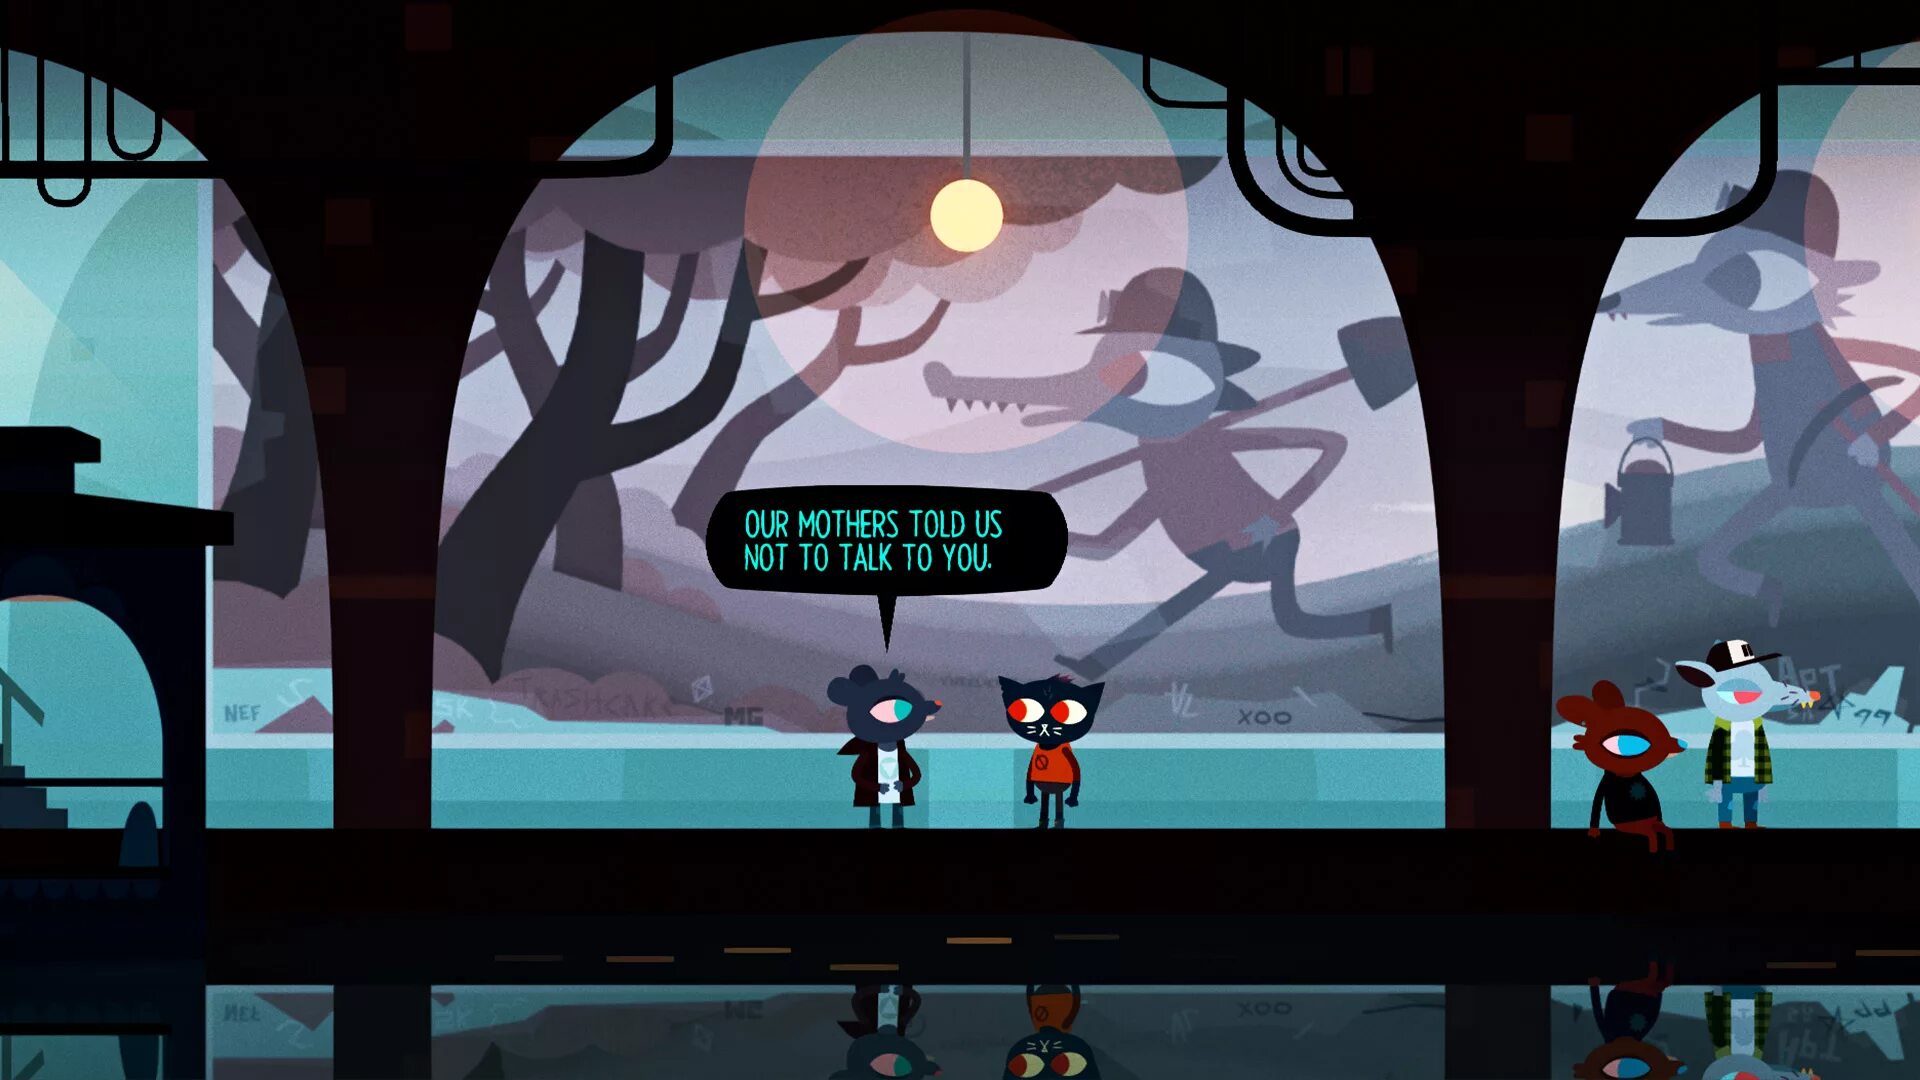 In the Woods игра. Night in the Woods игра. Night in the Woods скрины. Night in the Woods город. Camp pinewood игра